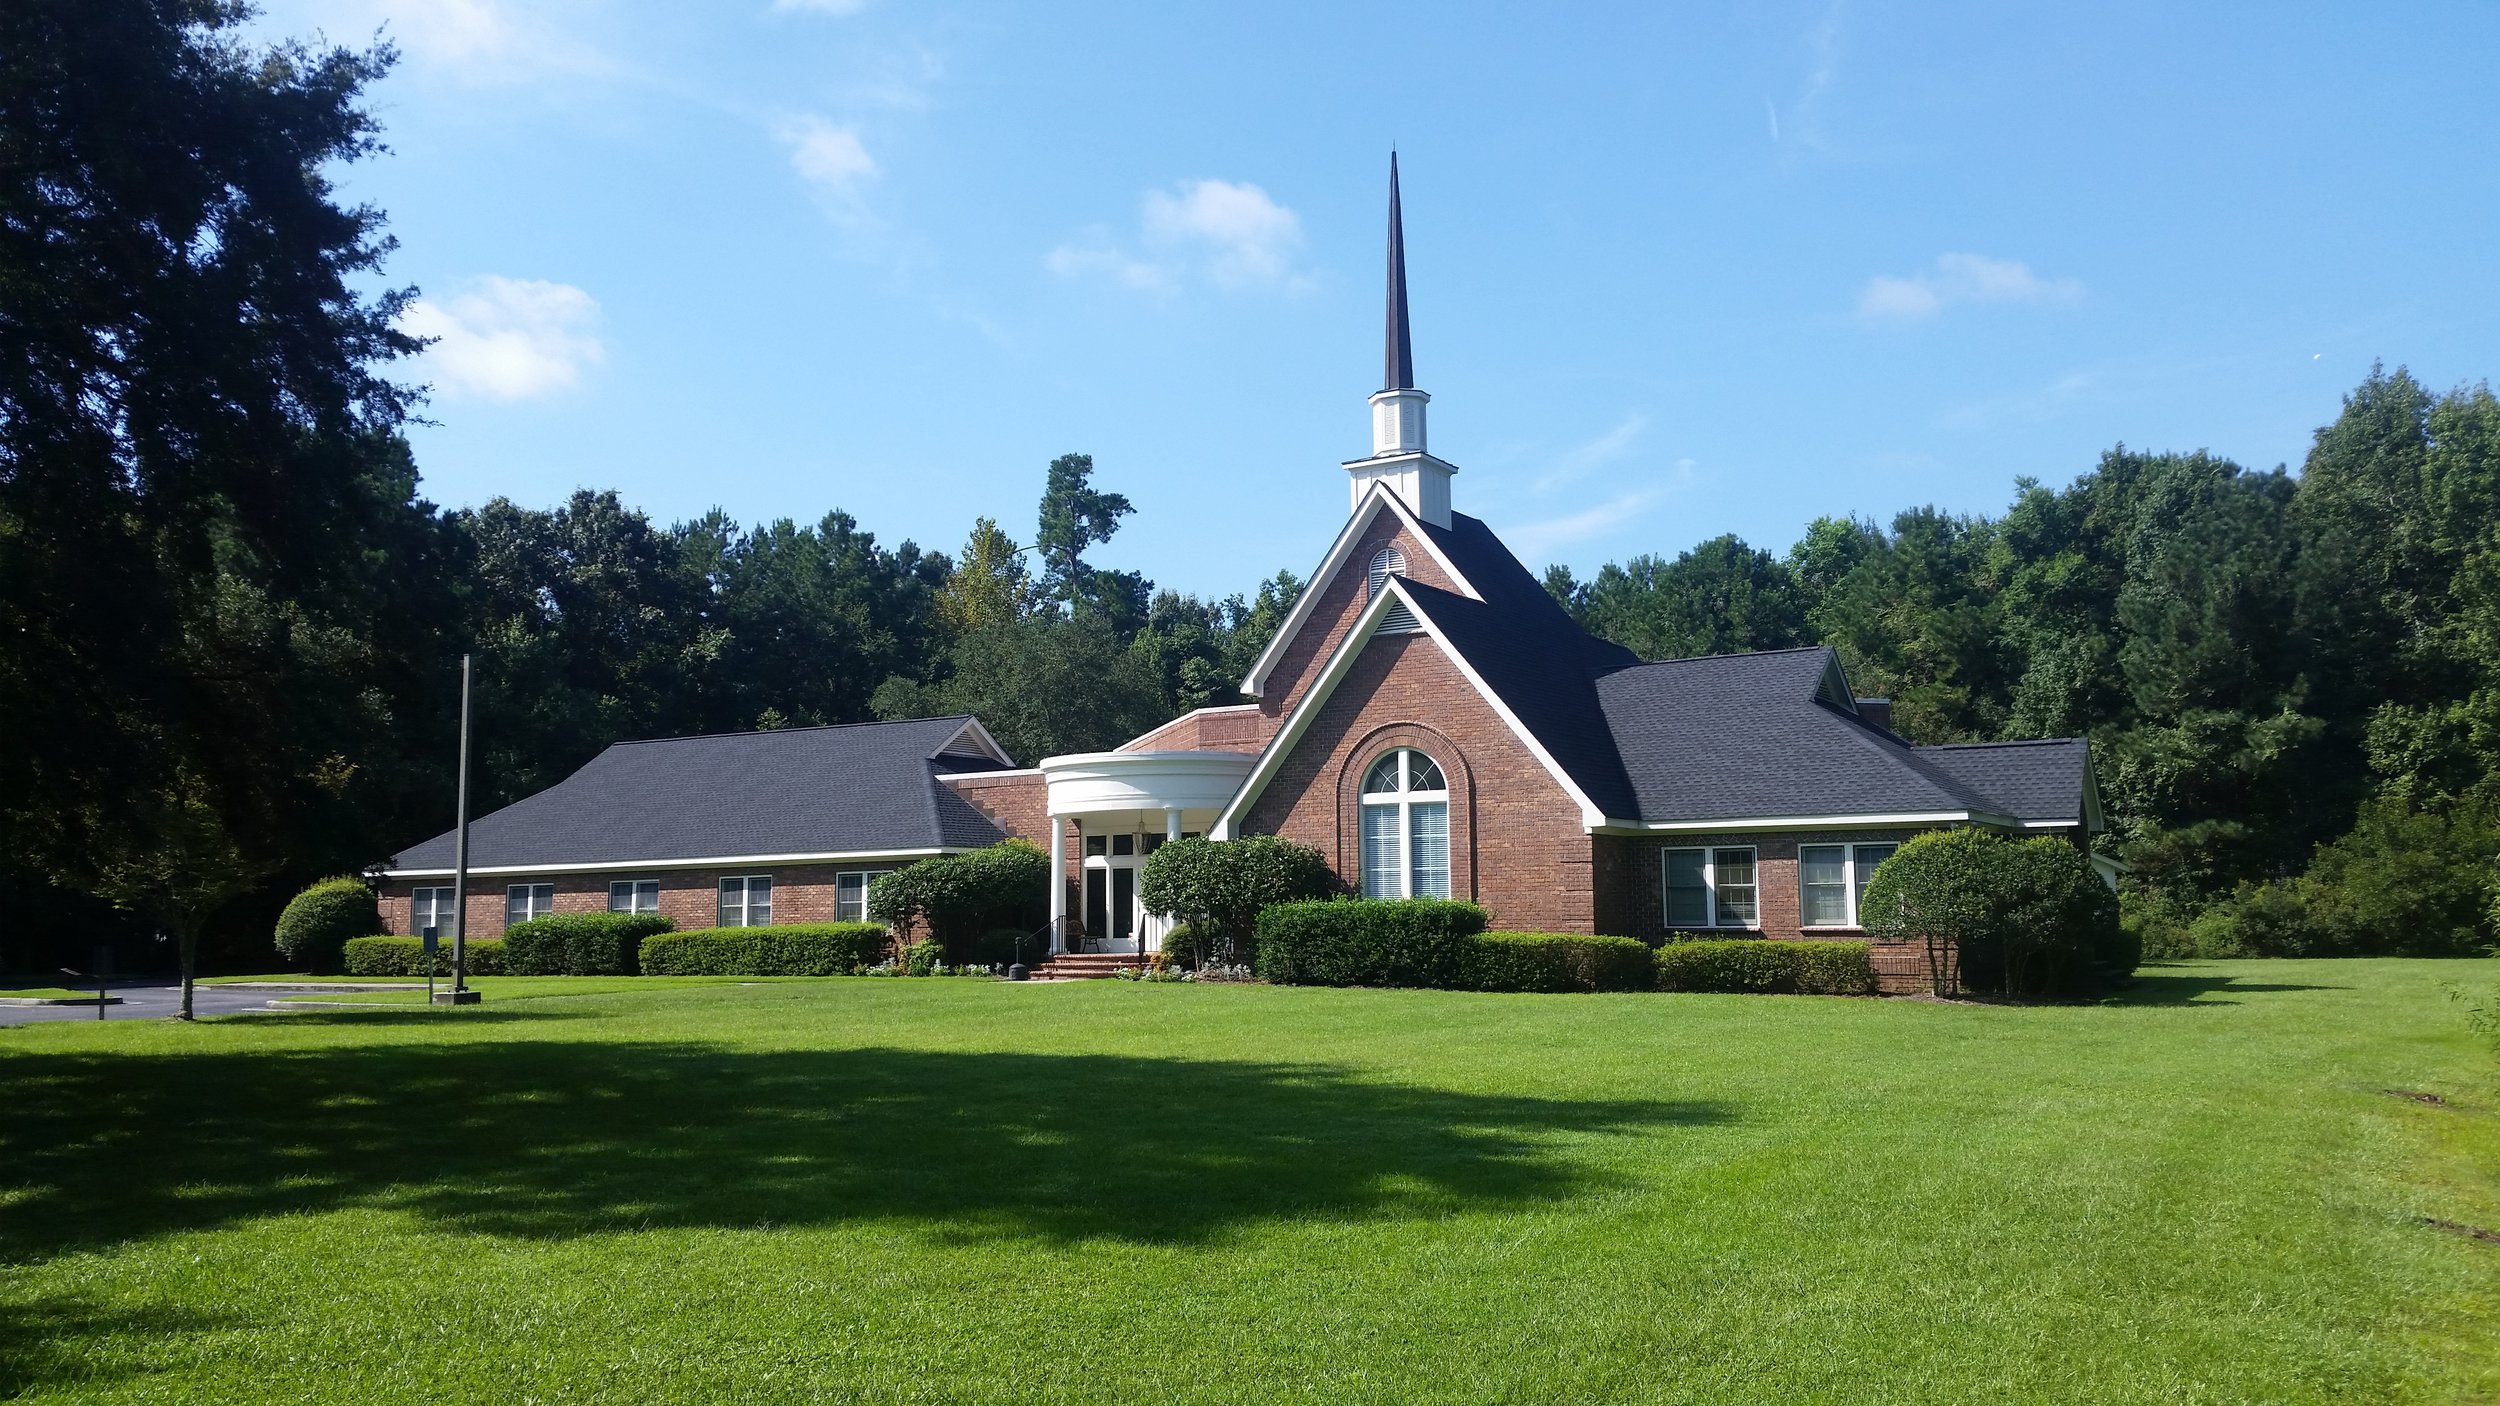  Walk Humbly   Church On The Path    Learn More  